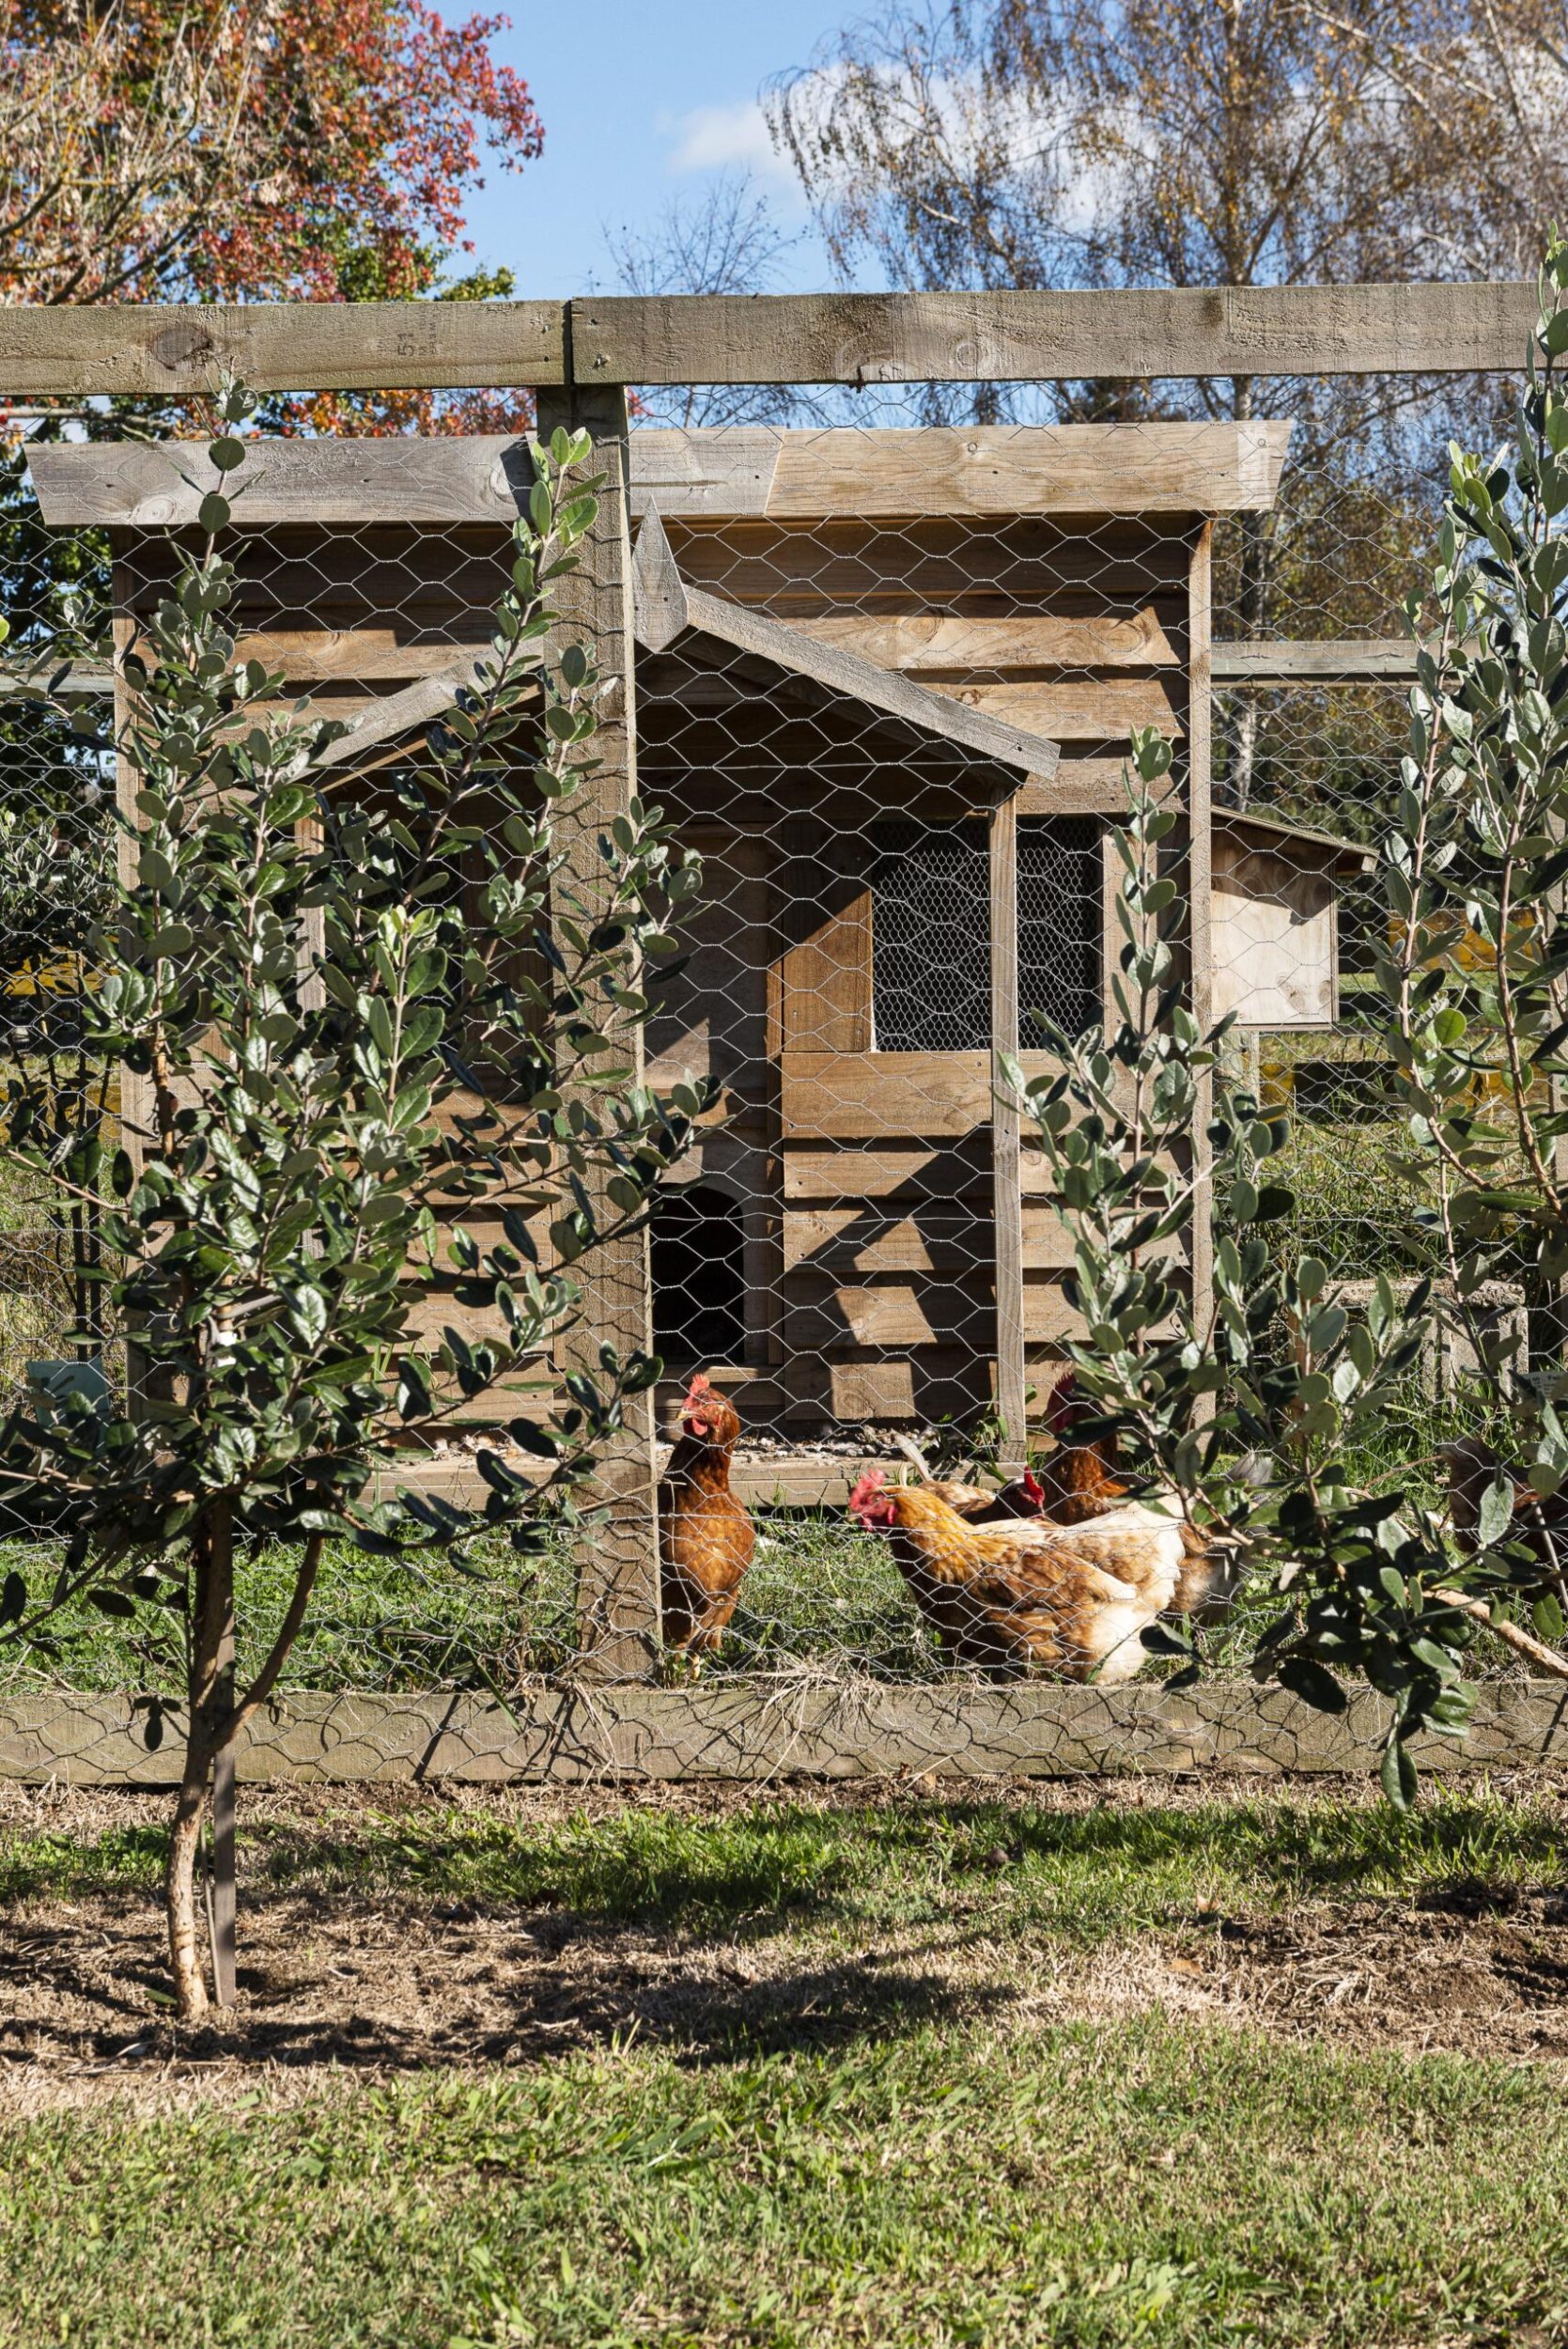 A chicken coop surrounded by trees and a hexagonal wire fence